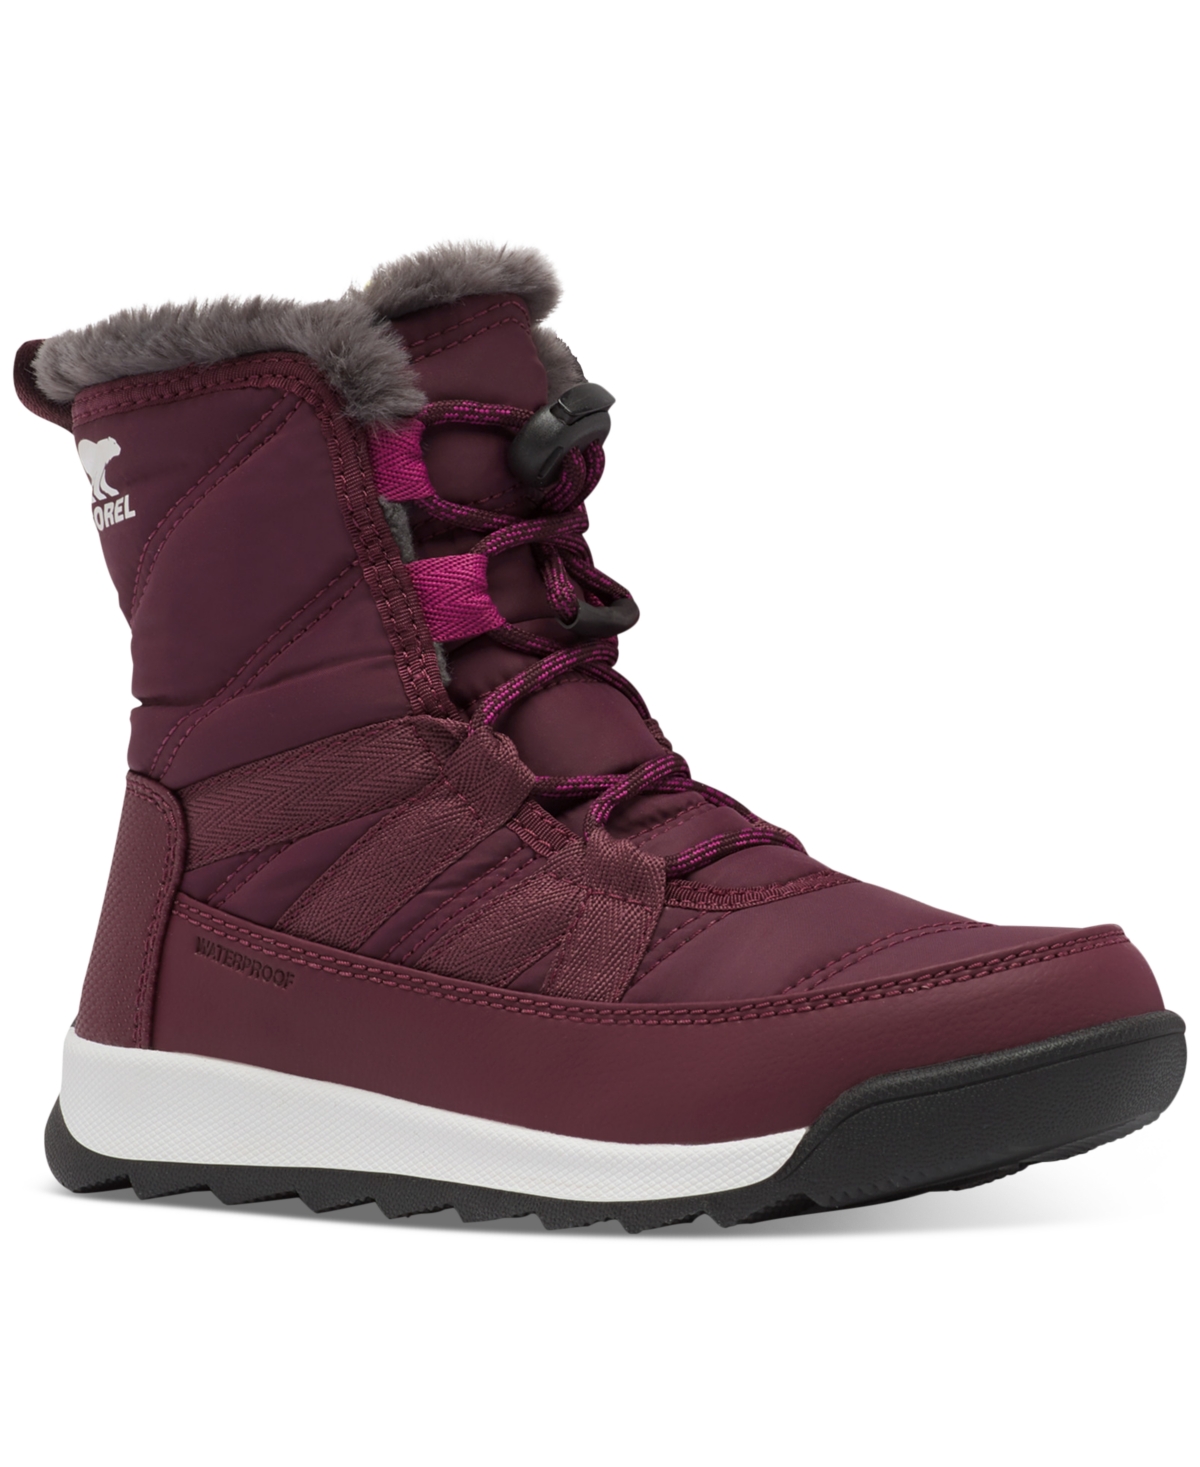 Sorel Youth Whitney Ii Short Lace Boots Women's Shoes